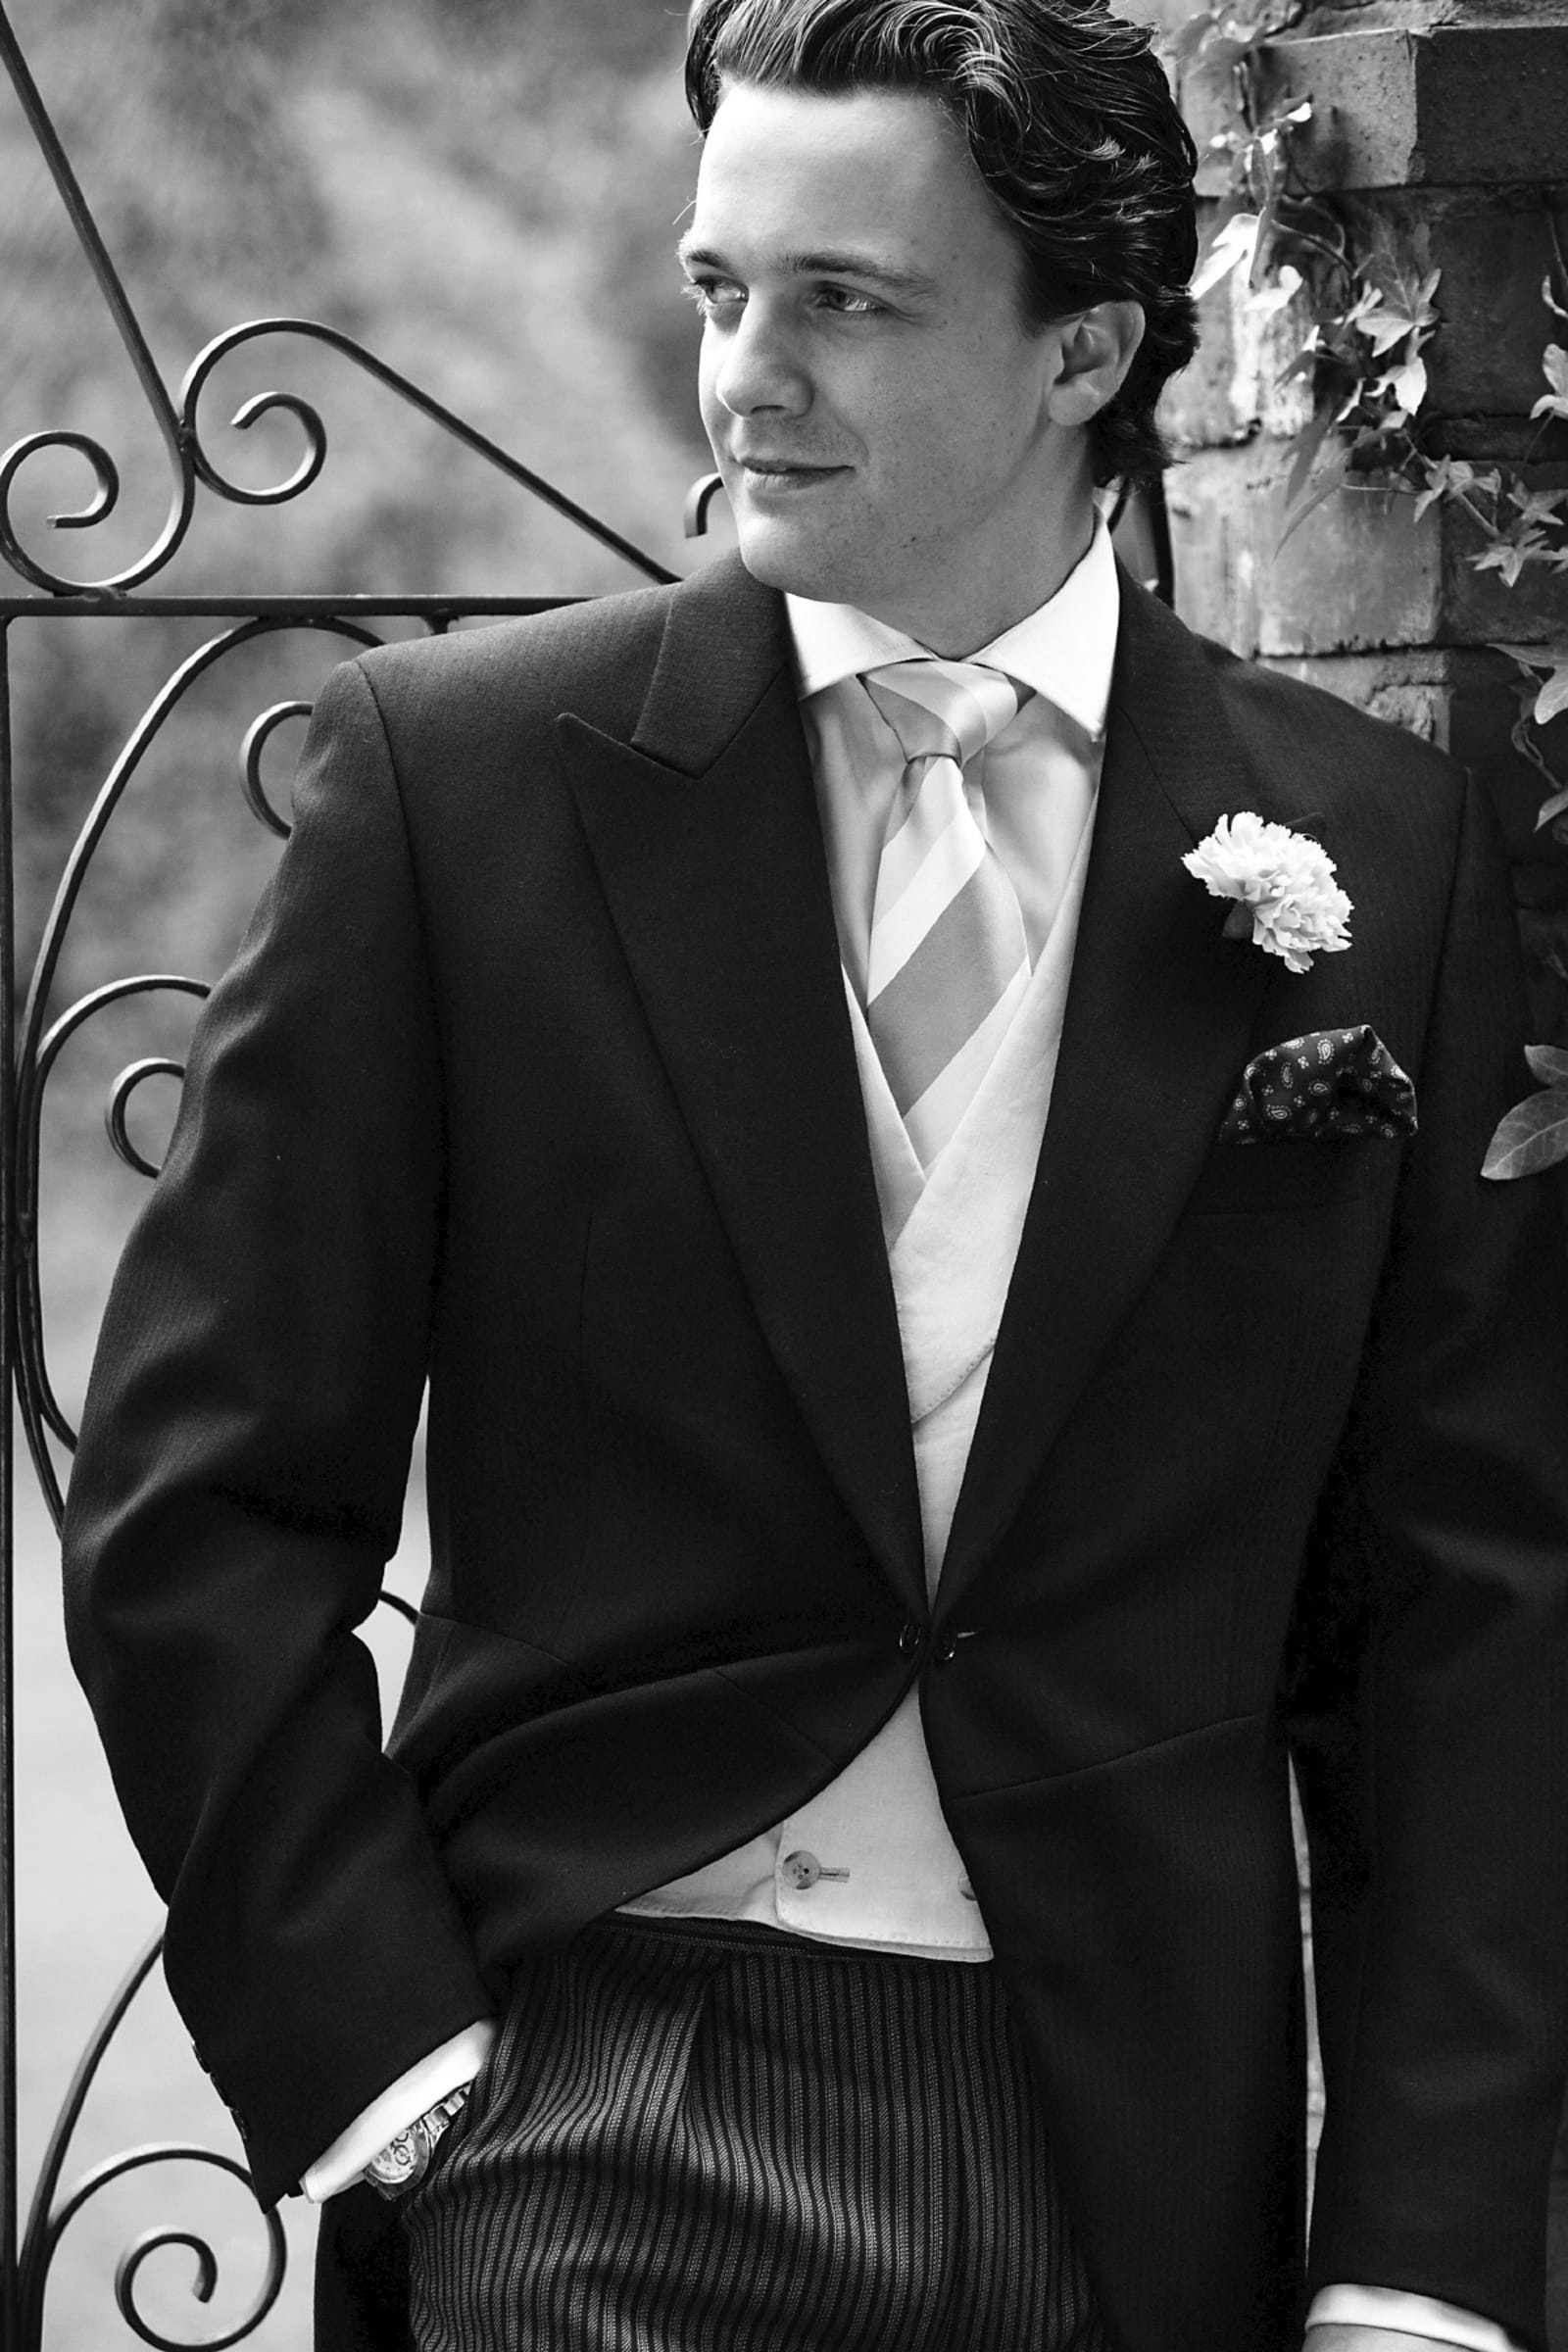 Tailored Luxury Wedding Suits For Men Formal Wear Bespoke Suit Savile Row Tailor, London and Cheshire Phillip Alexander